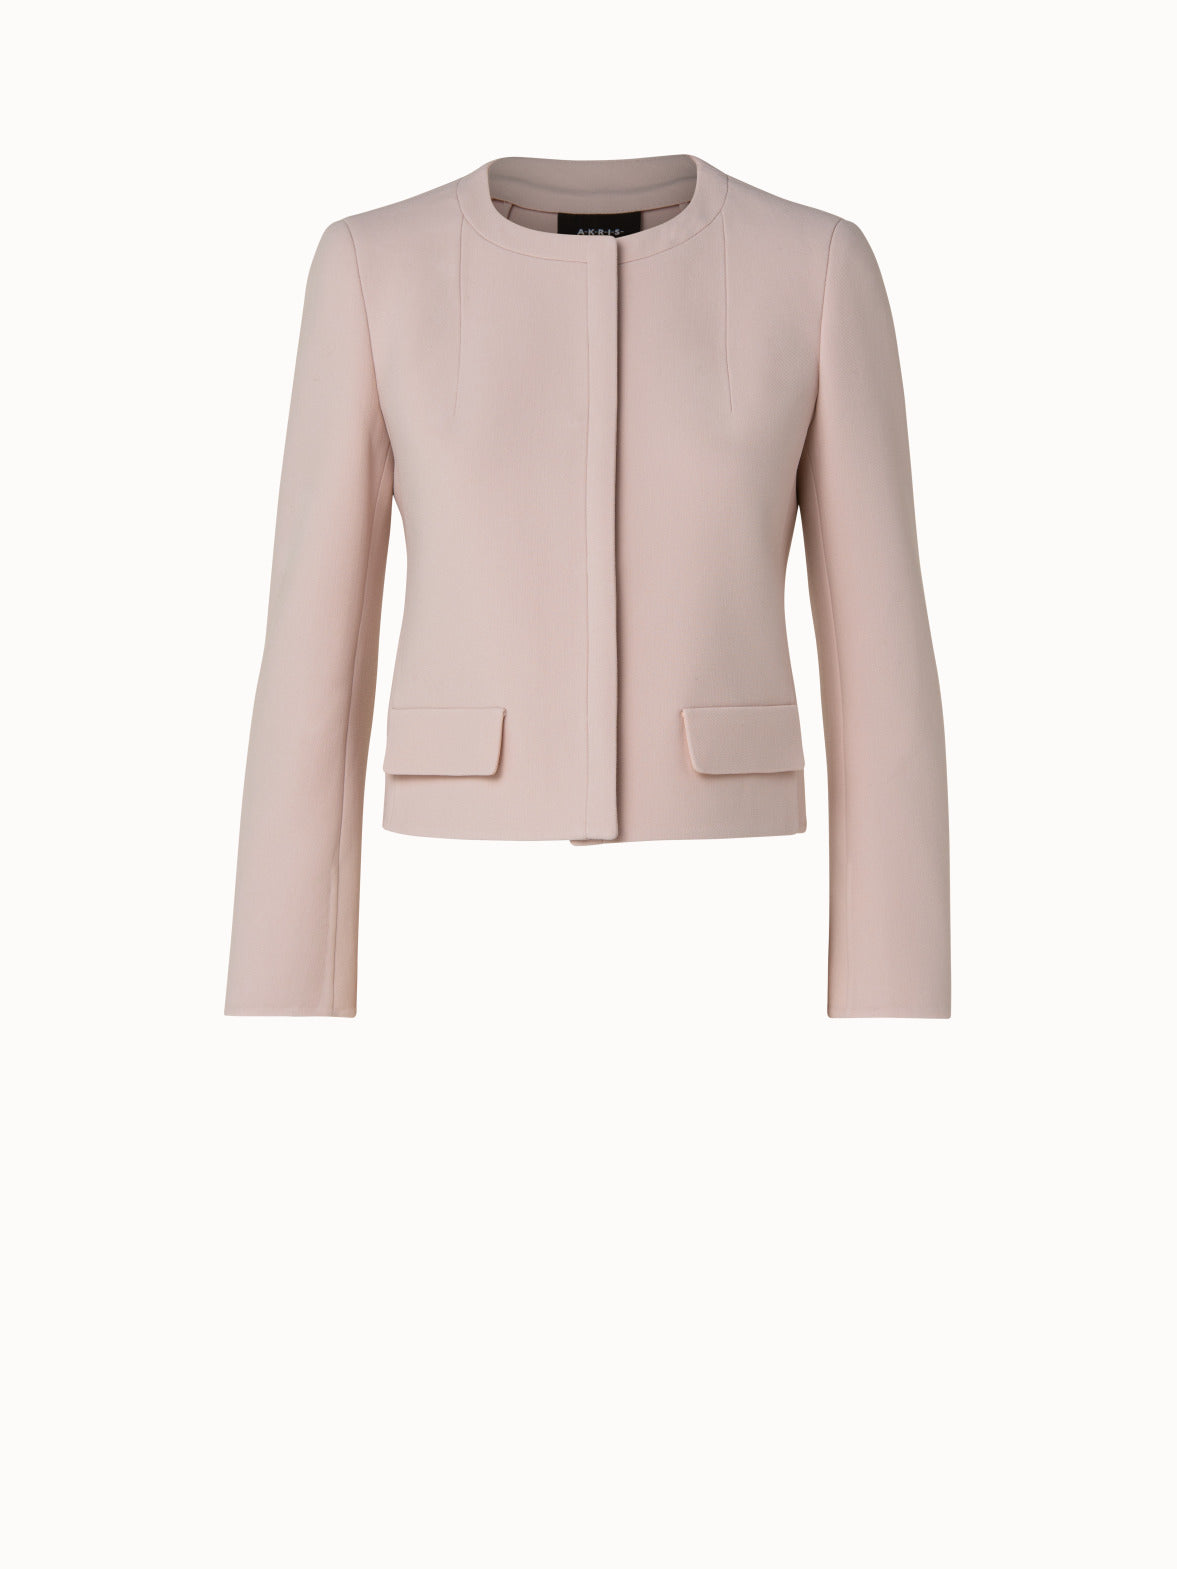 Wool Double Face Stretch Jacket with Hook Closure